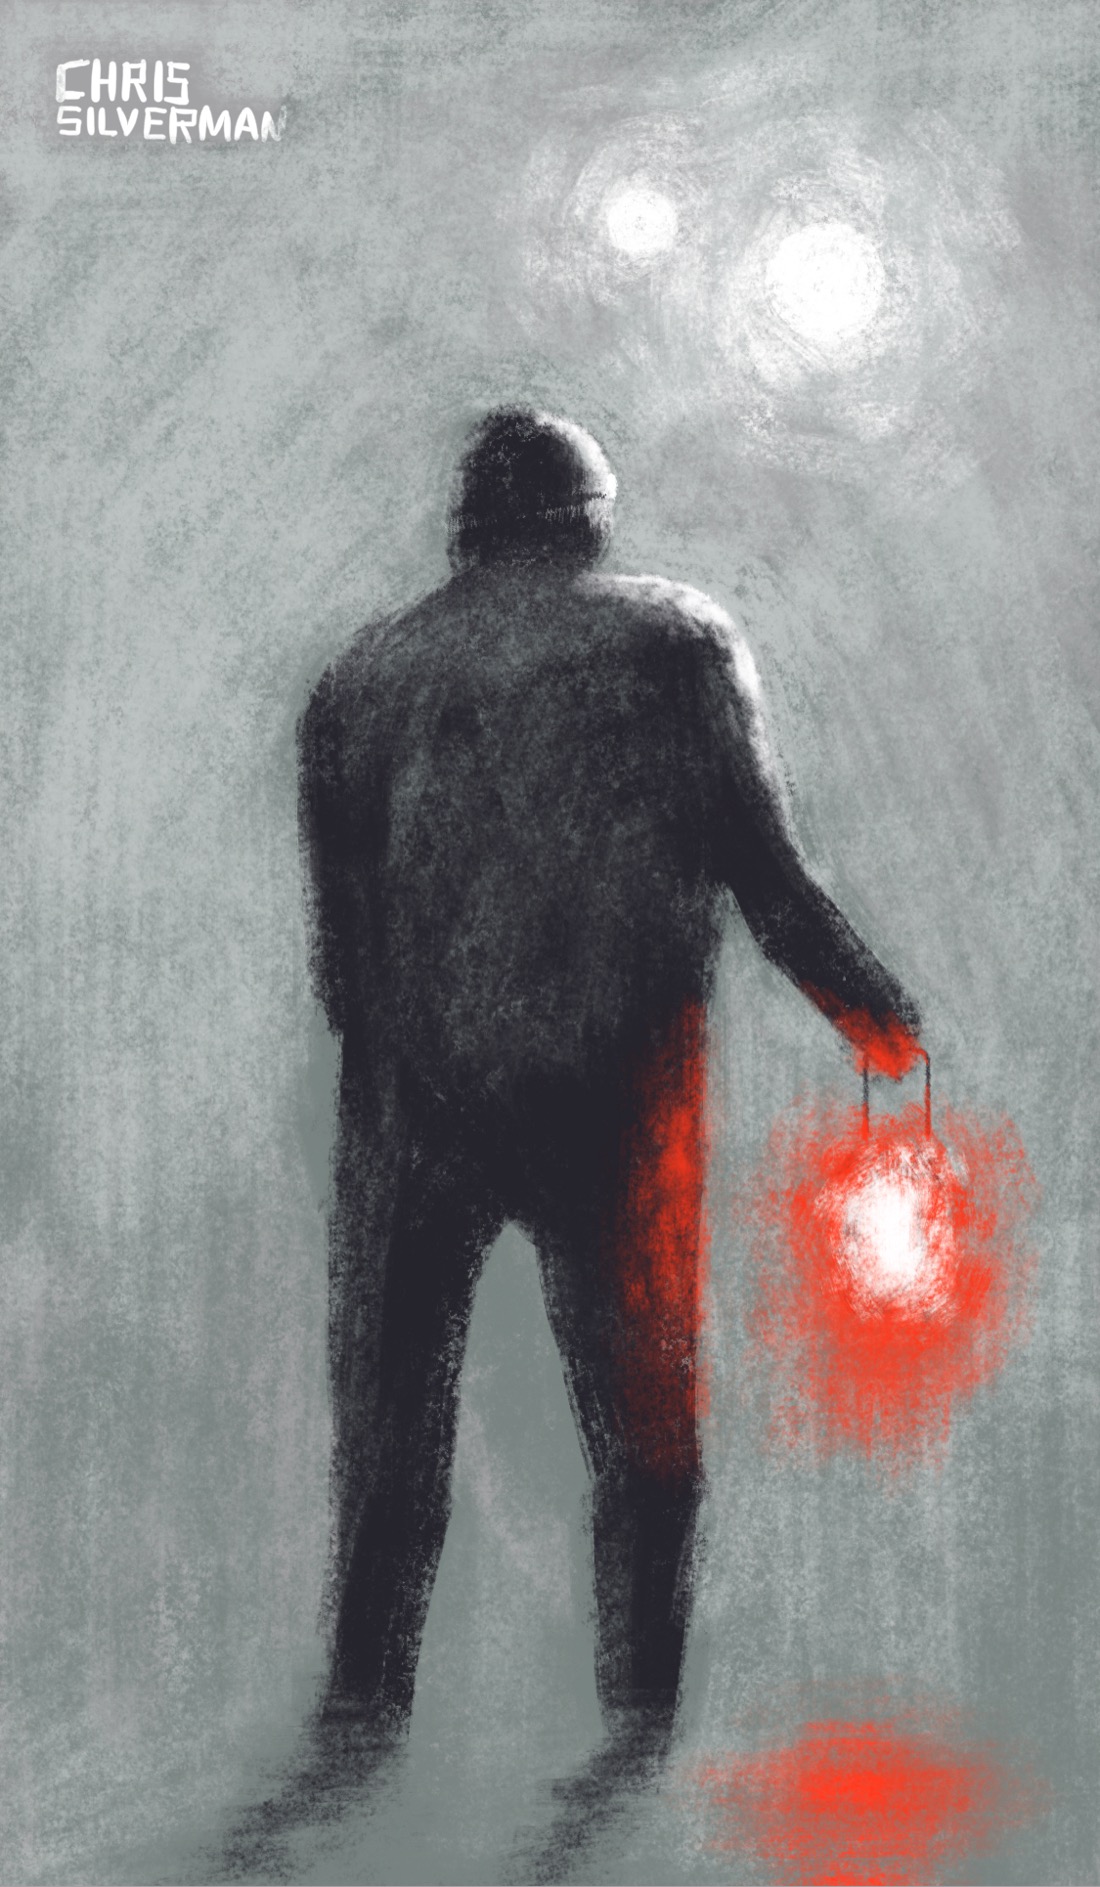 A figure stands alone, silhouetted in the blazing glare of two bright white spotlights in the top right of the drawing. The figure appears to be wearing a jacket and hat, and is holding a glowing red lantern. There are very few details about the surroundings or the ground—most of the painting is gray—but there are hints of reflections on the ground, as though the figure is standing on a wet surface.